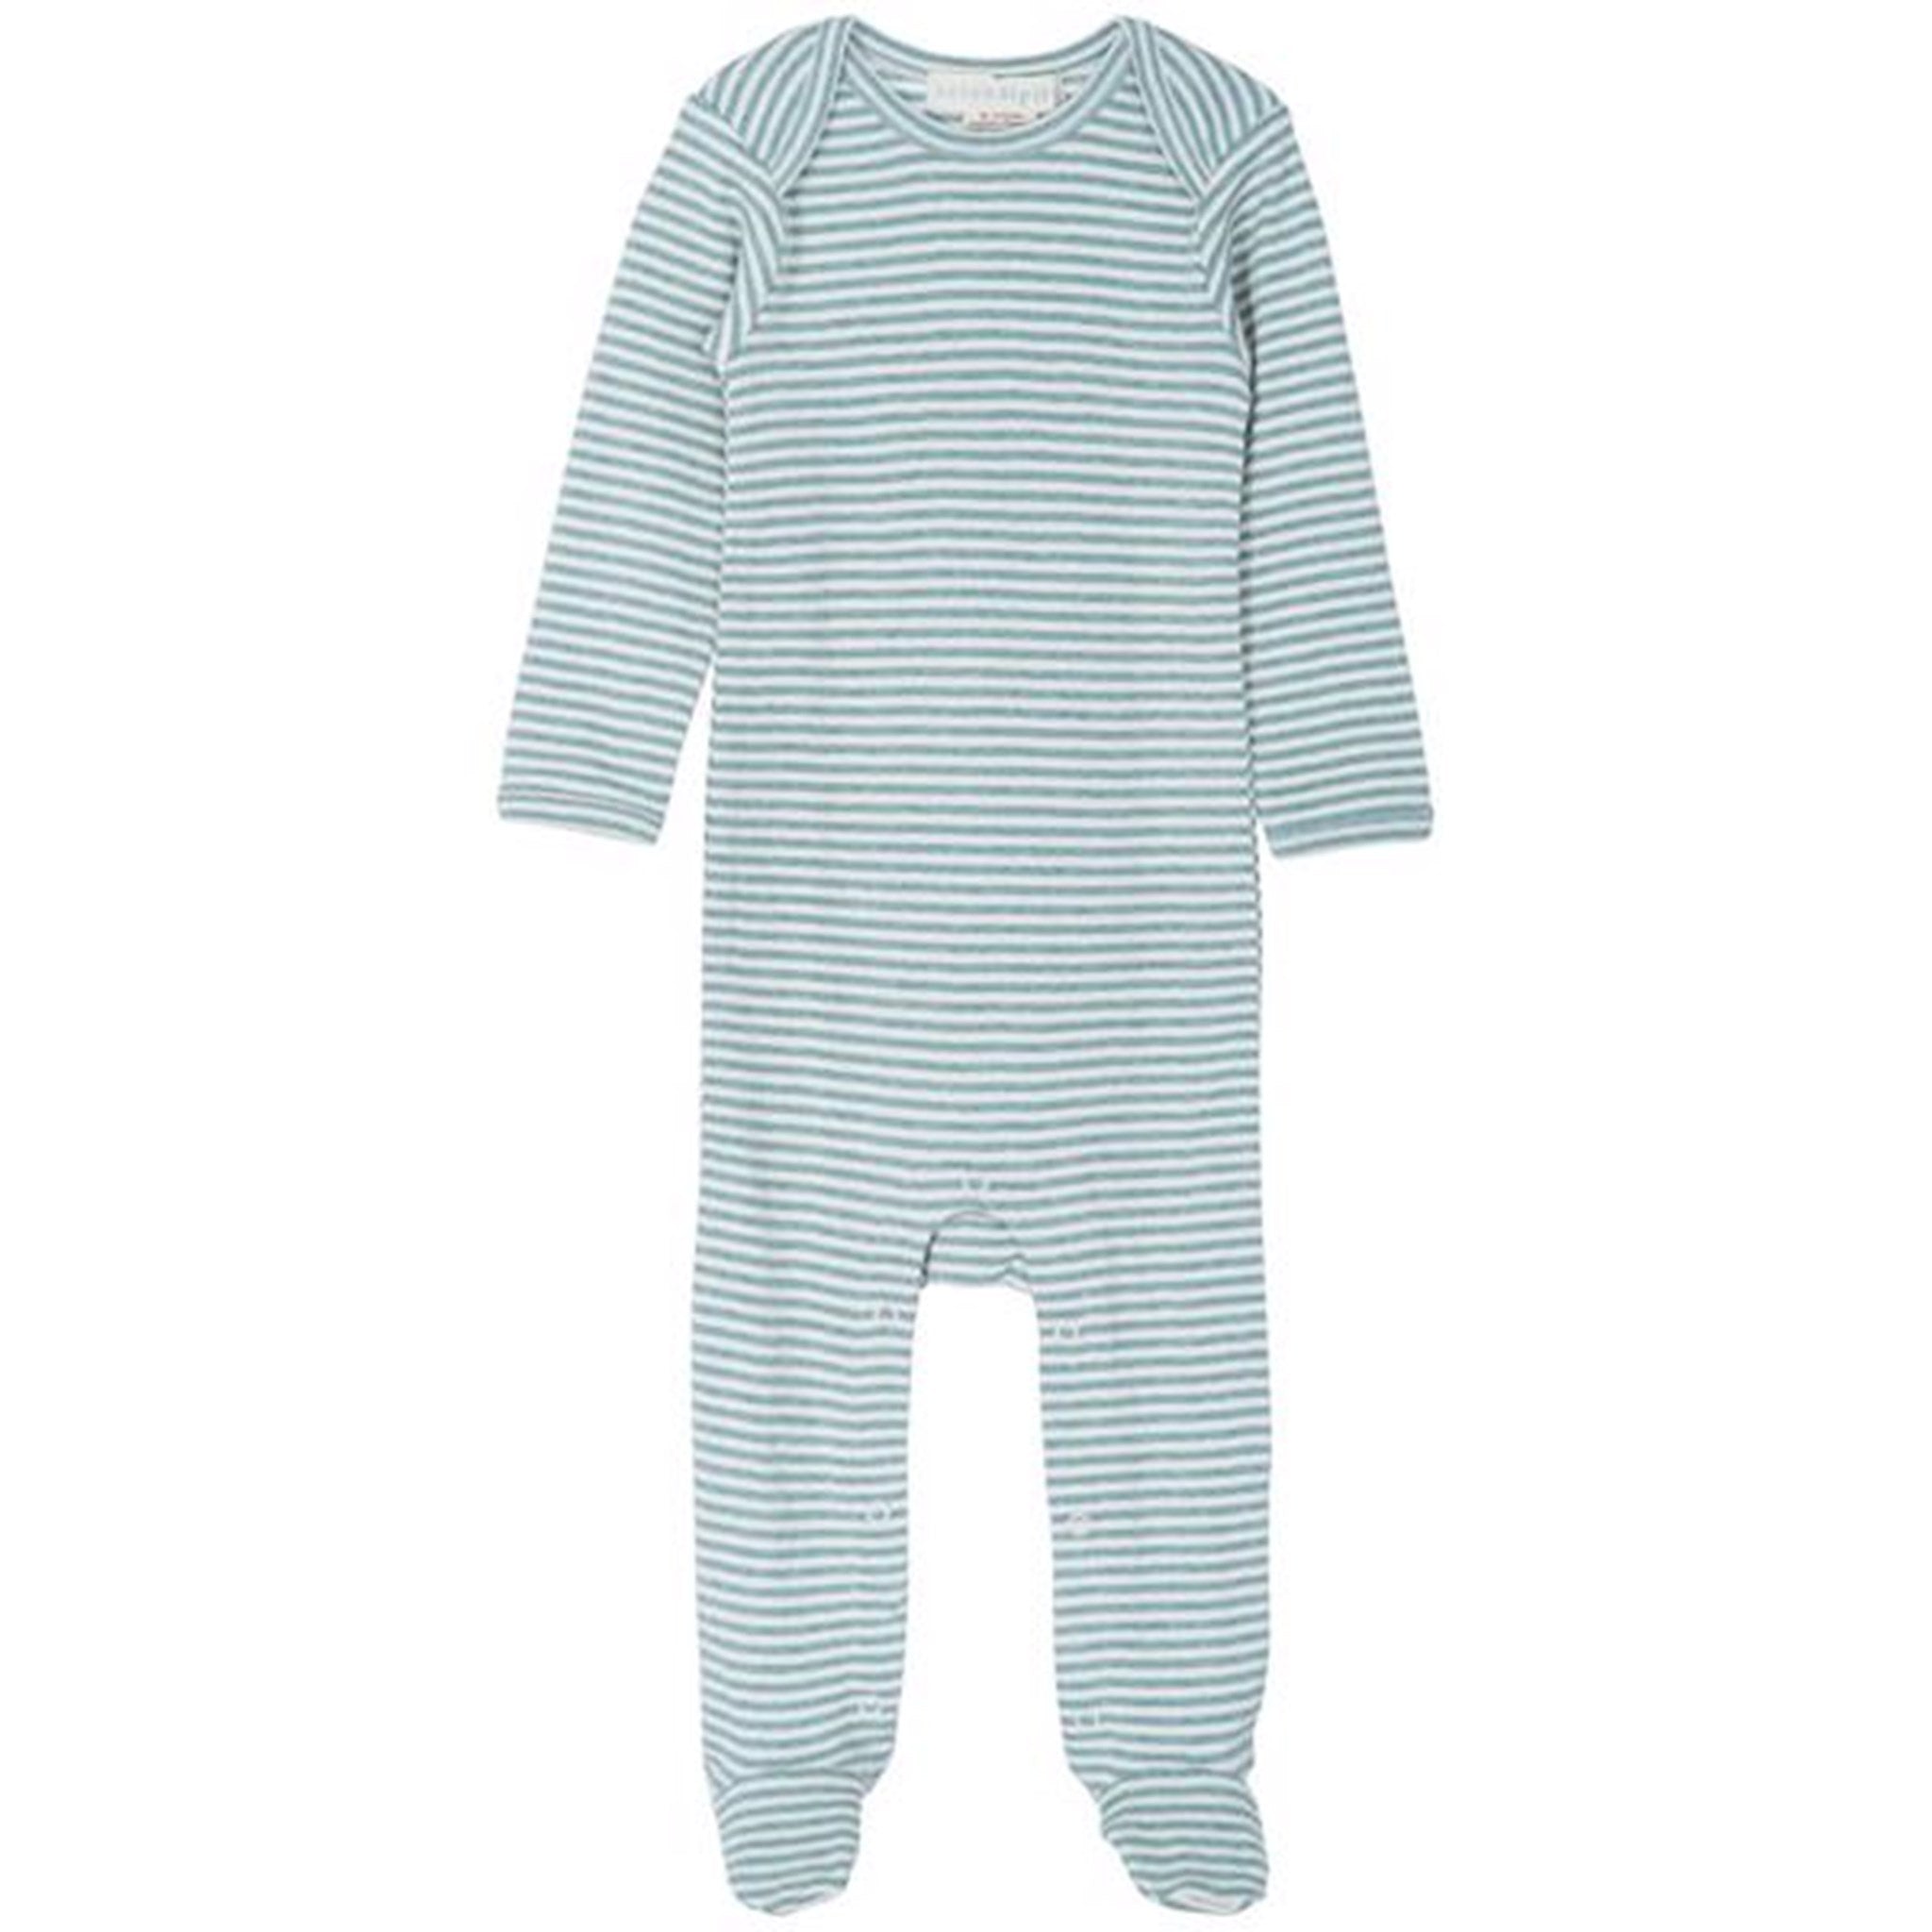 Serendipity Lake/Offwhite Baby Suit Stripe